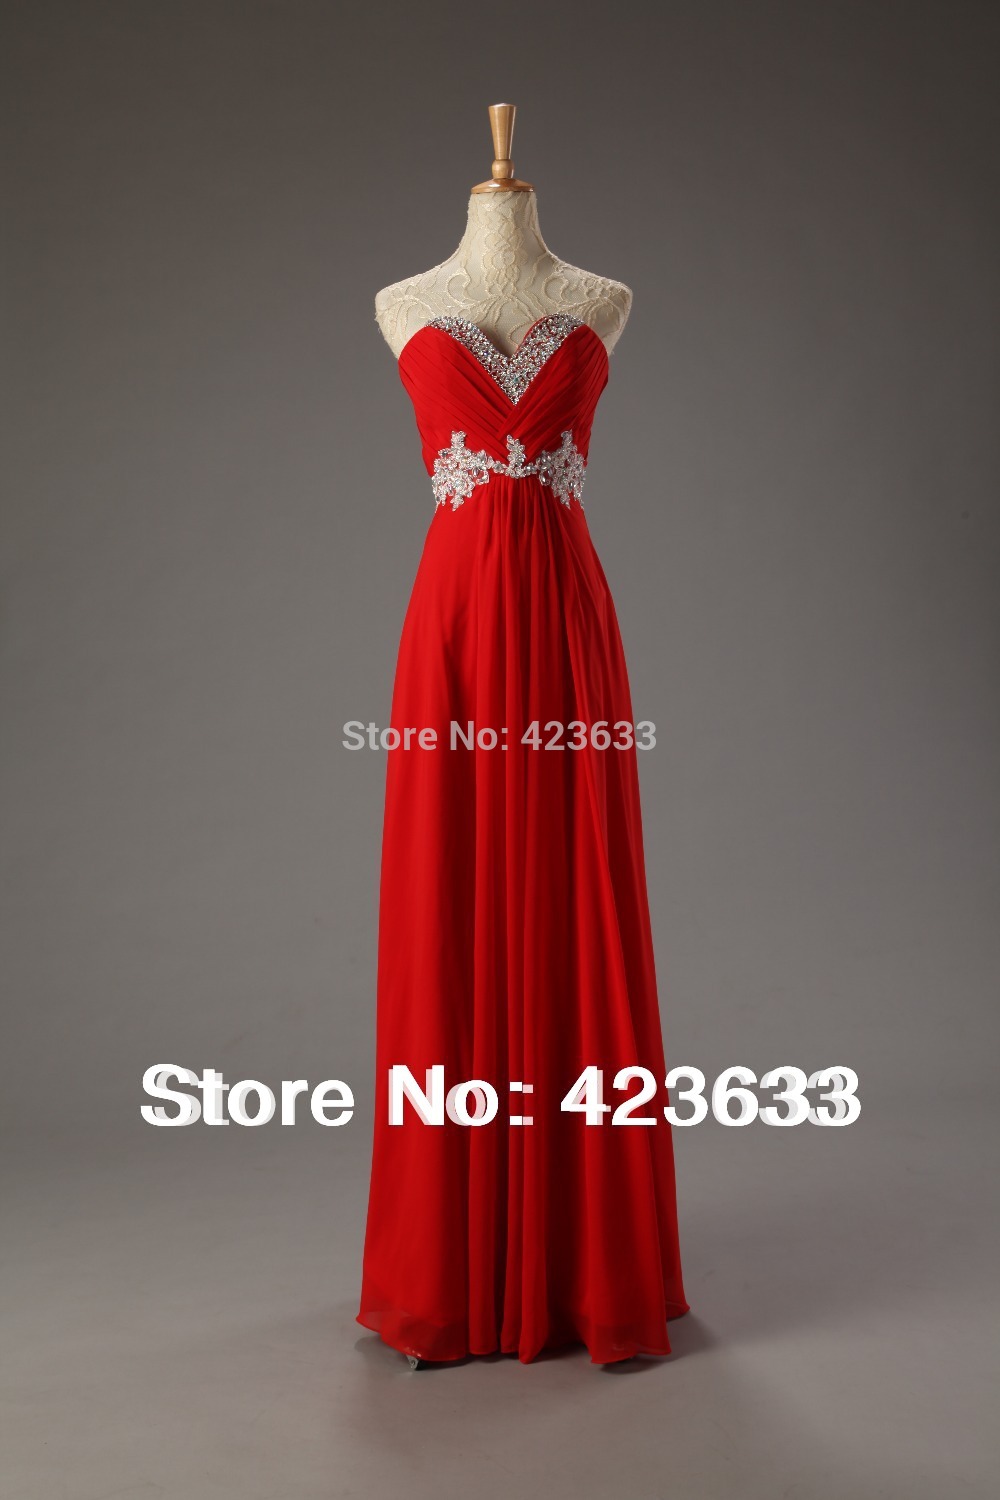 ... Red Long Cheap Prom Dress Under 50 2014 Free Shipping(China (Mainland